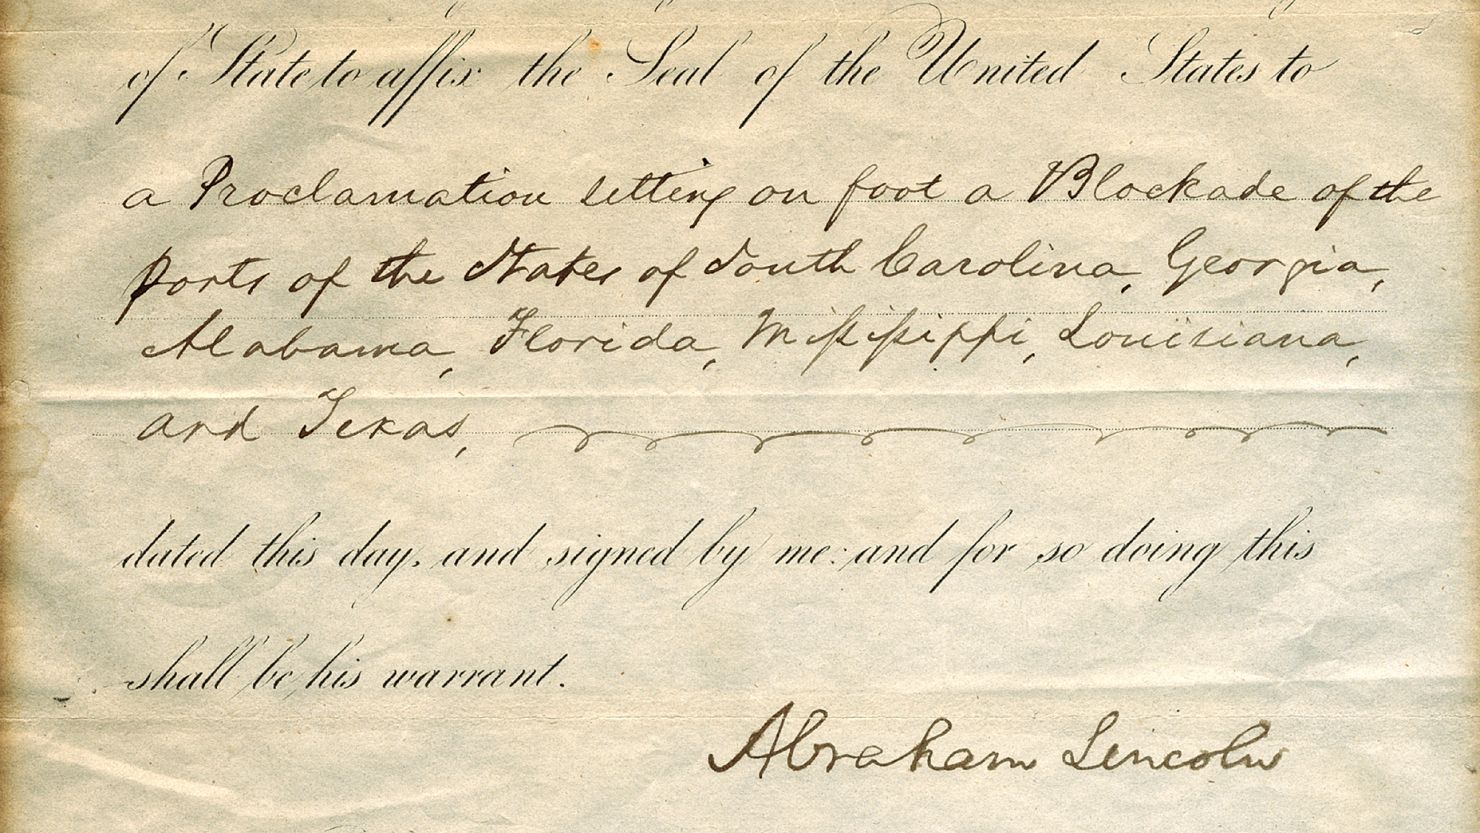 This document, signed by President Abraham Lincoln, authorized the start of the U.S. Civil War in 1861.